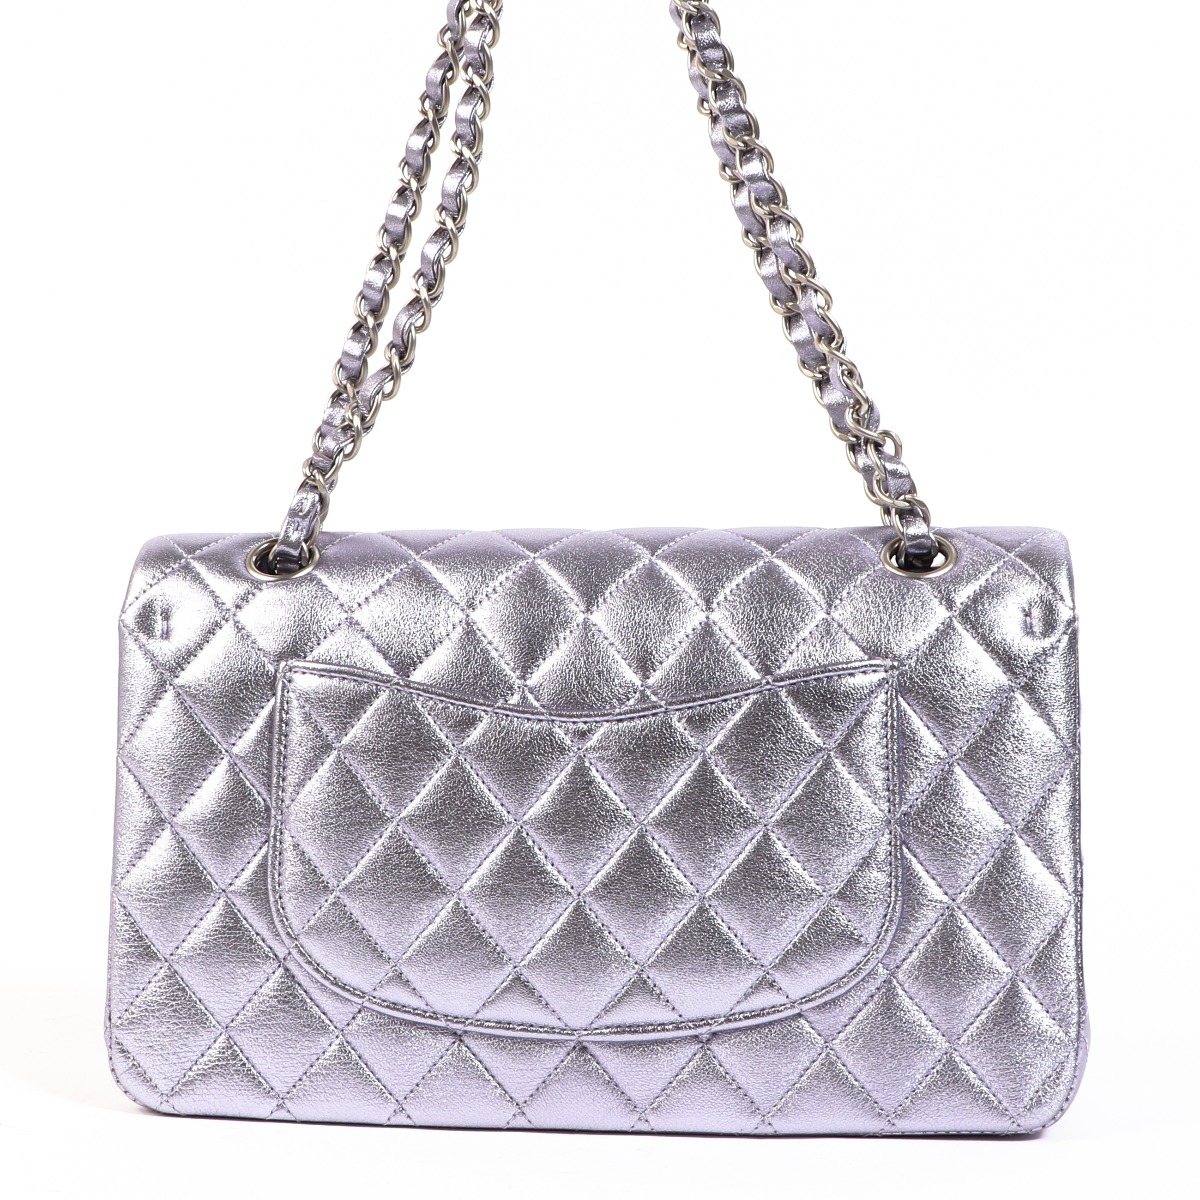 Sold at Auction Chanel Metallic Gold Quilted Lambskin Classic Flap Bag